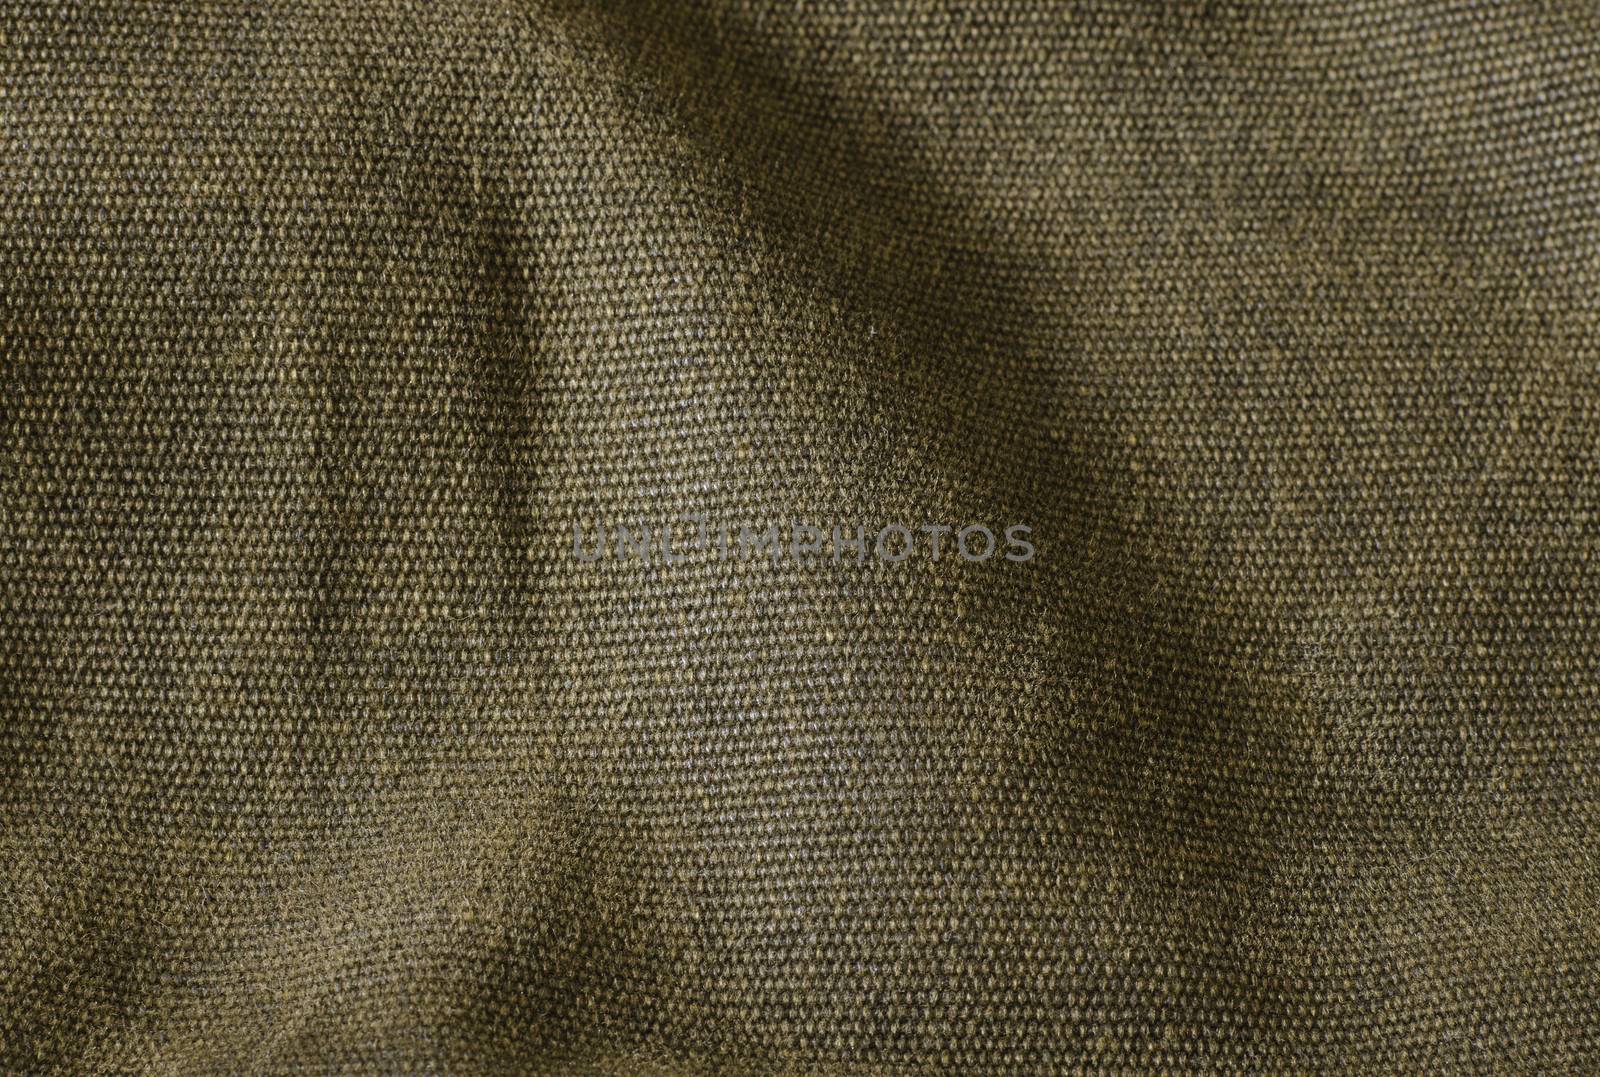 Textile texture by siraanamwong